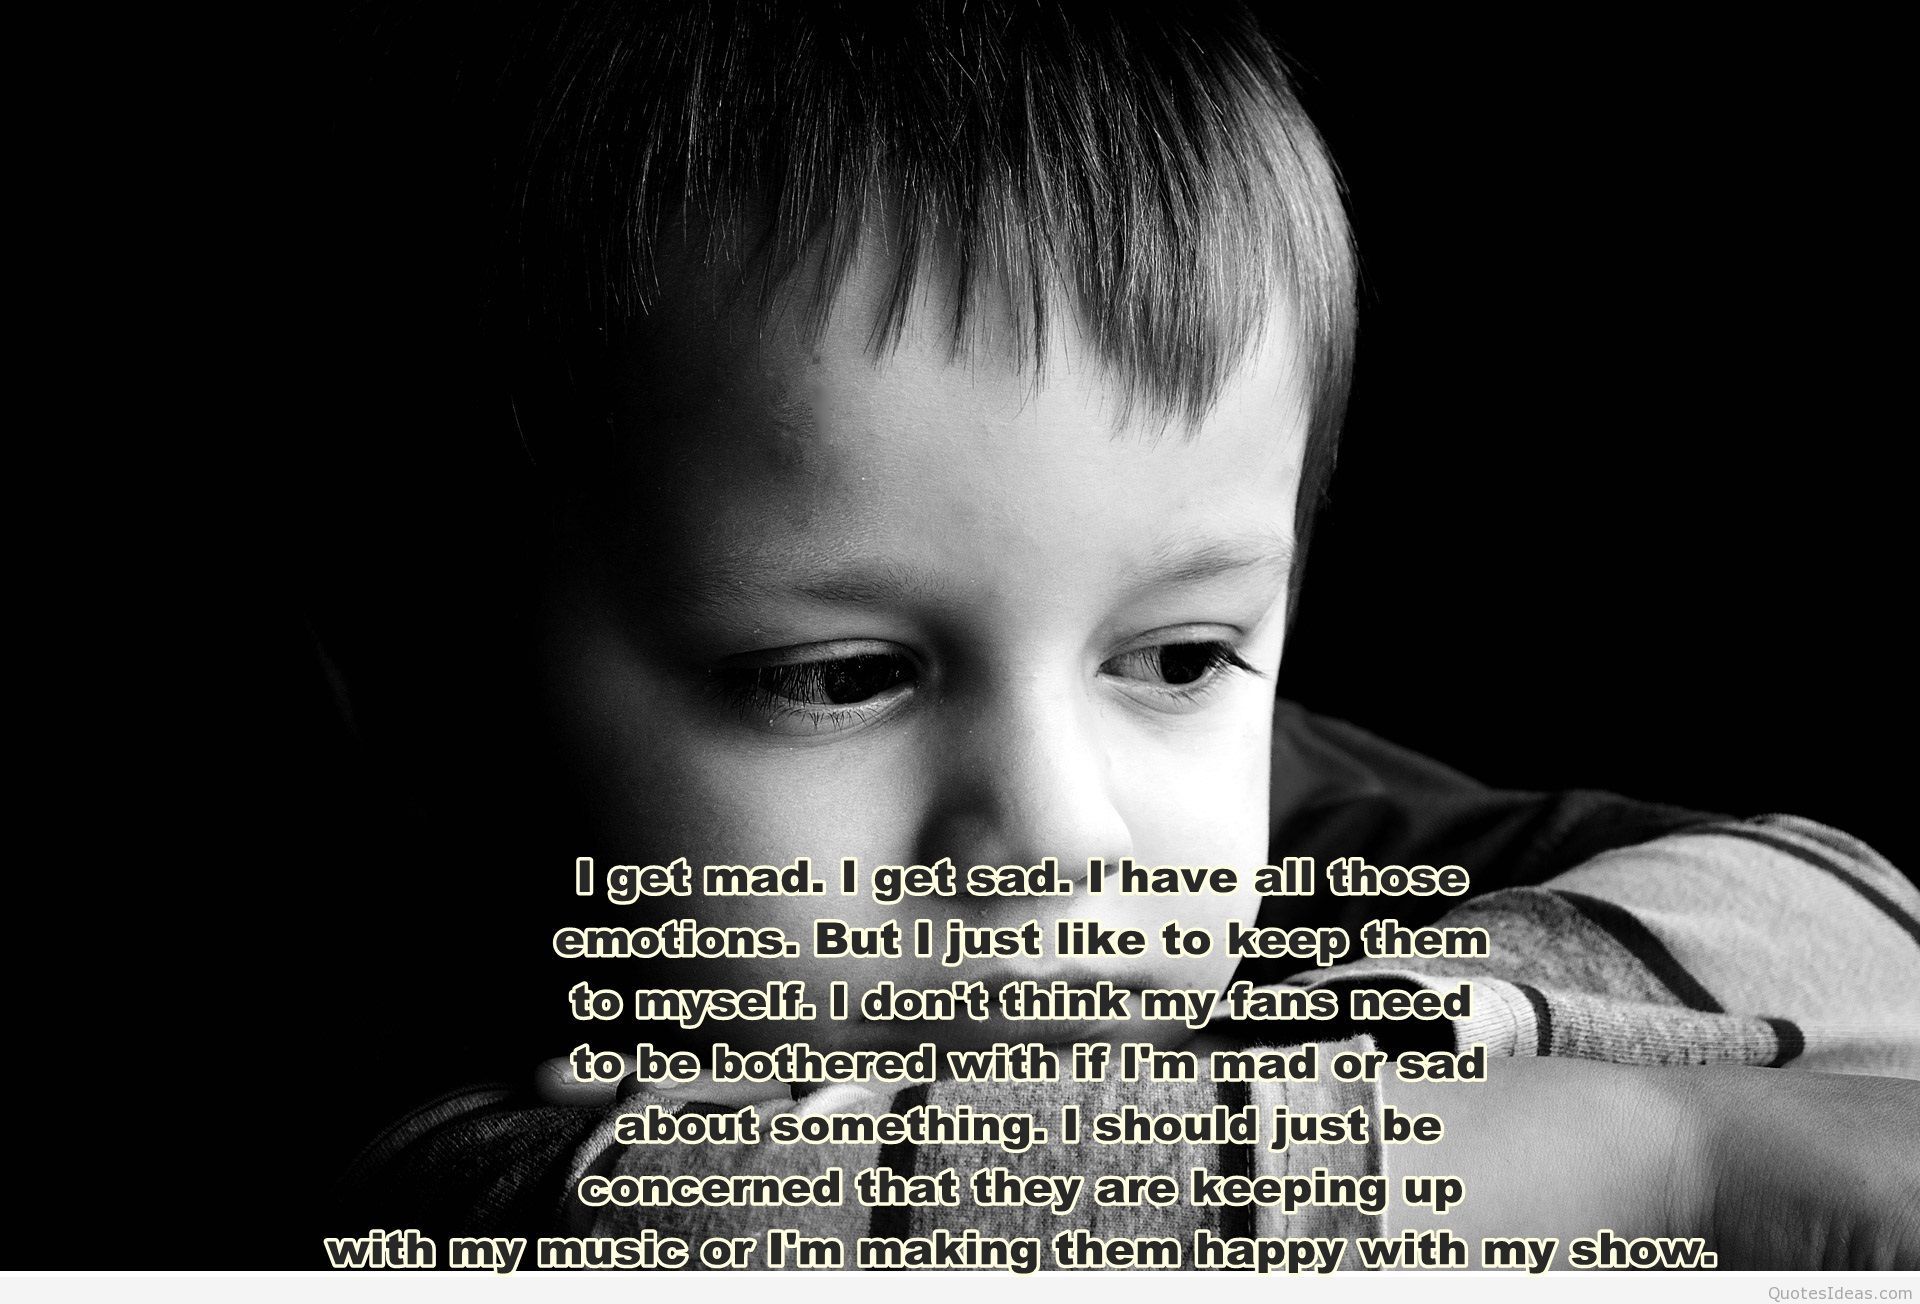 Sad child wallpaper HD with a quote